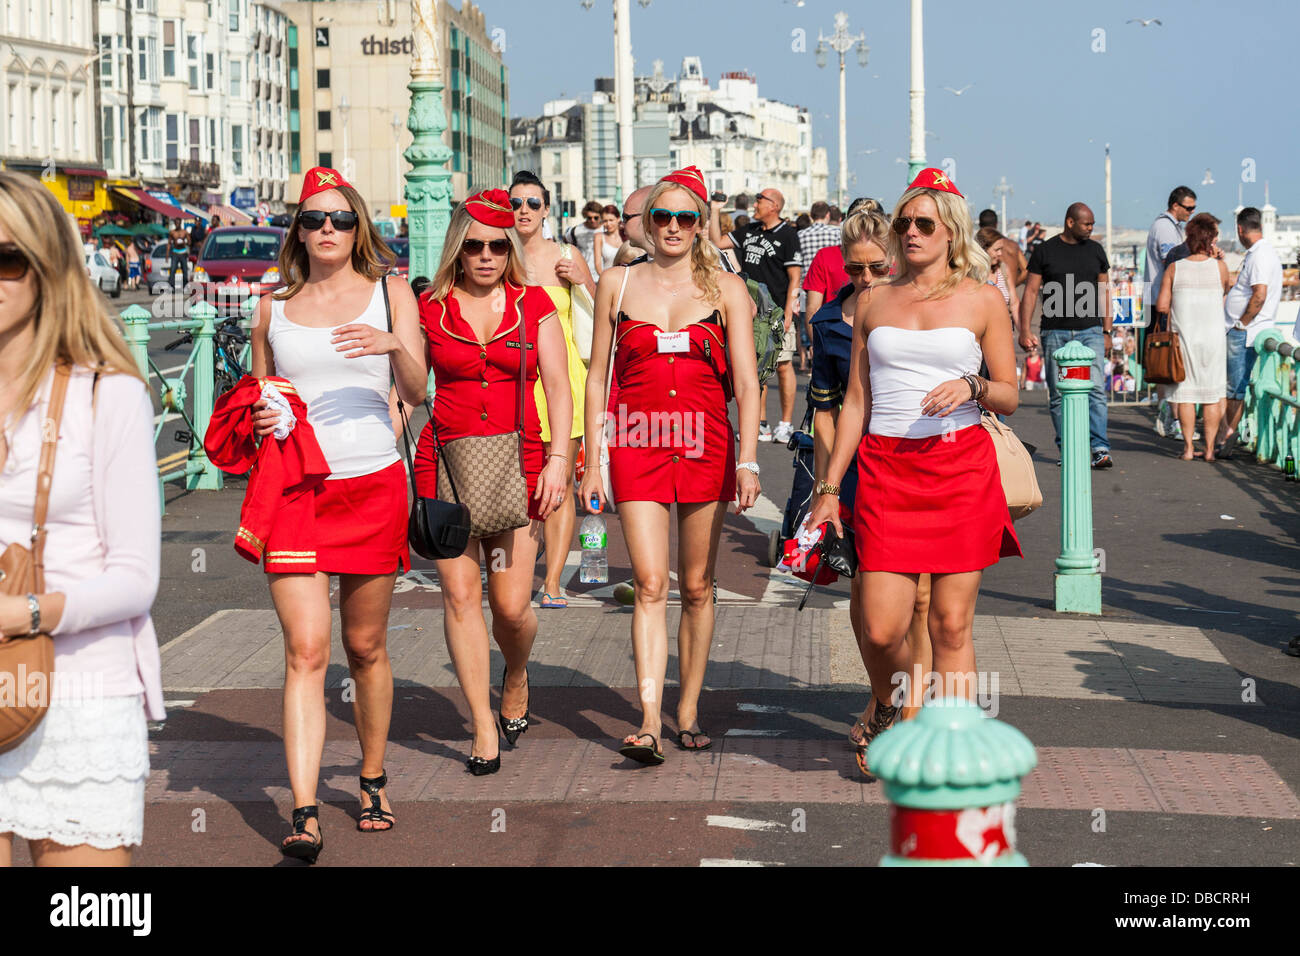 Group of women ready for a hen night, Brighton, England, UK. Stock Photo